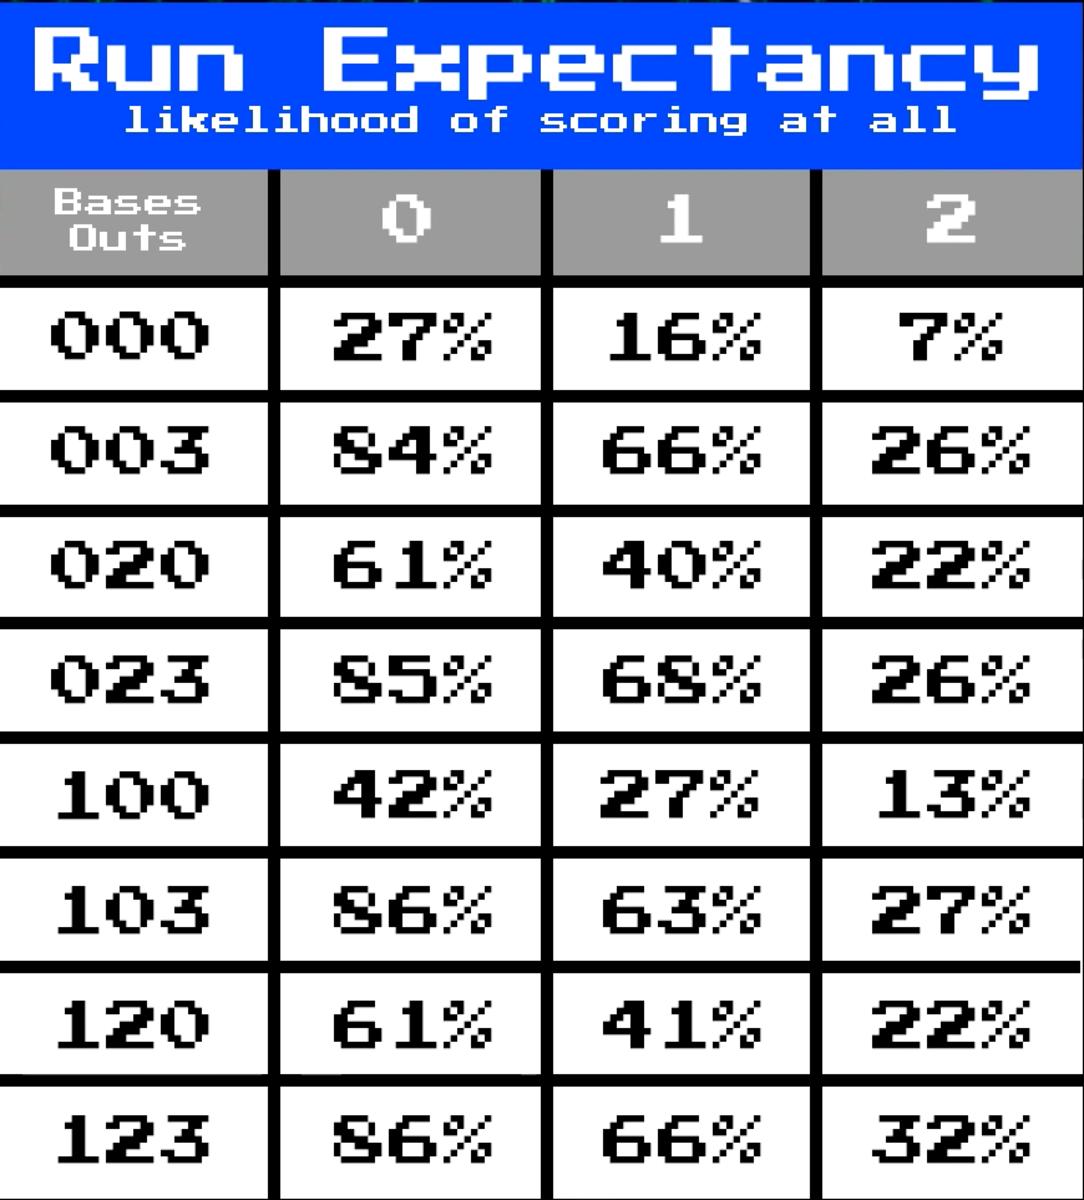 This chart tells us what the likelihood is of a runner scoring in a given inning, based on the outs (columns) and position of runners on base (rows).